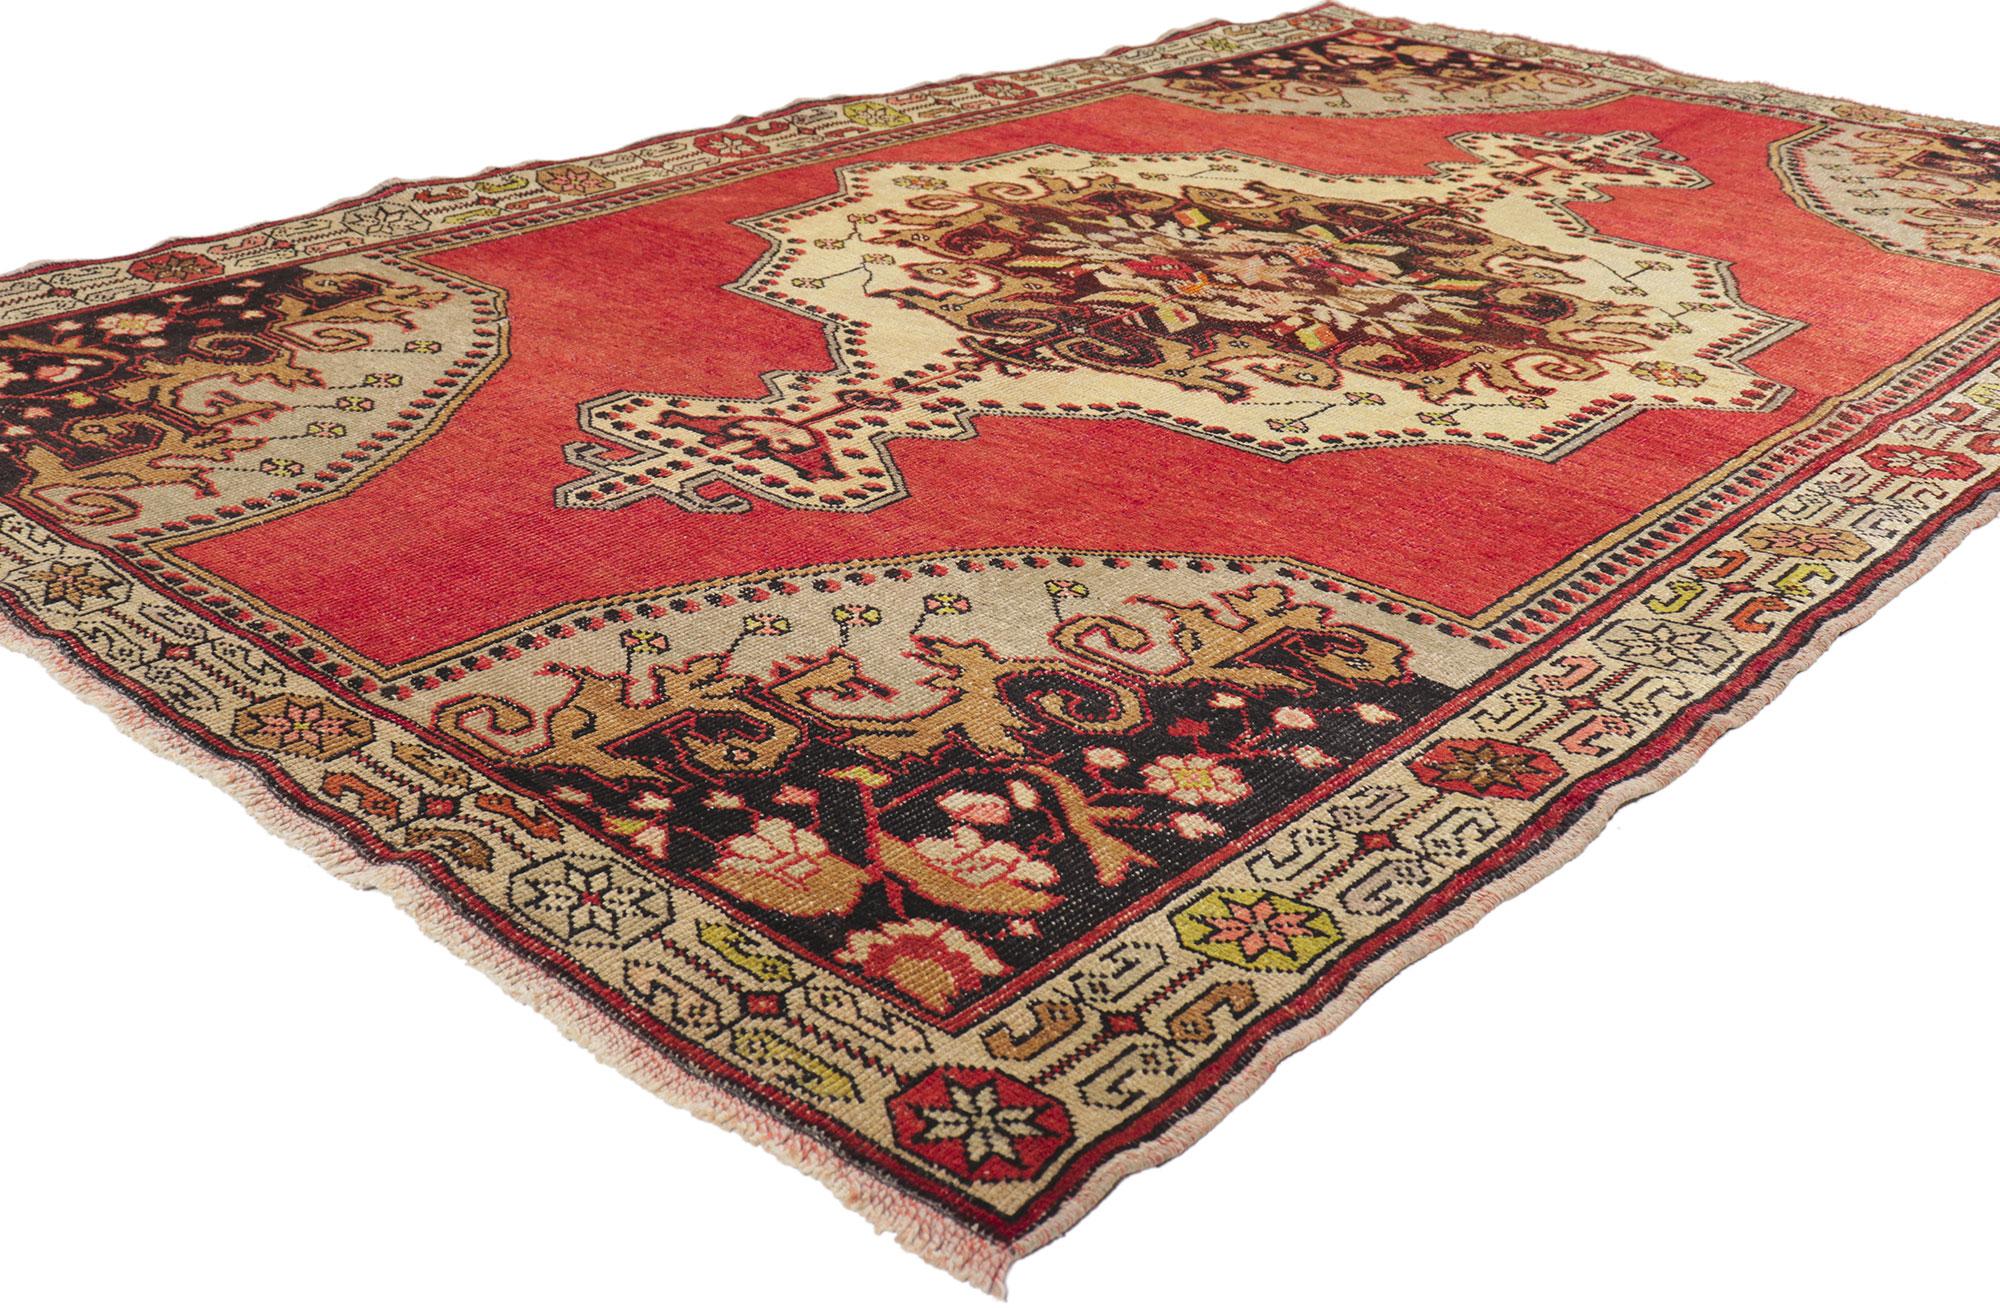 50722 Vintage Red Turkish Oushak Rug, 04'10 X 08'00. In this hand-knotted wool vintage Turkish Oushak rug, a majestic cusped center medallion adorned with Elibelinde pendants floats serenely against a lavish red field. The classic Elibelinde motif,